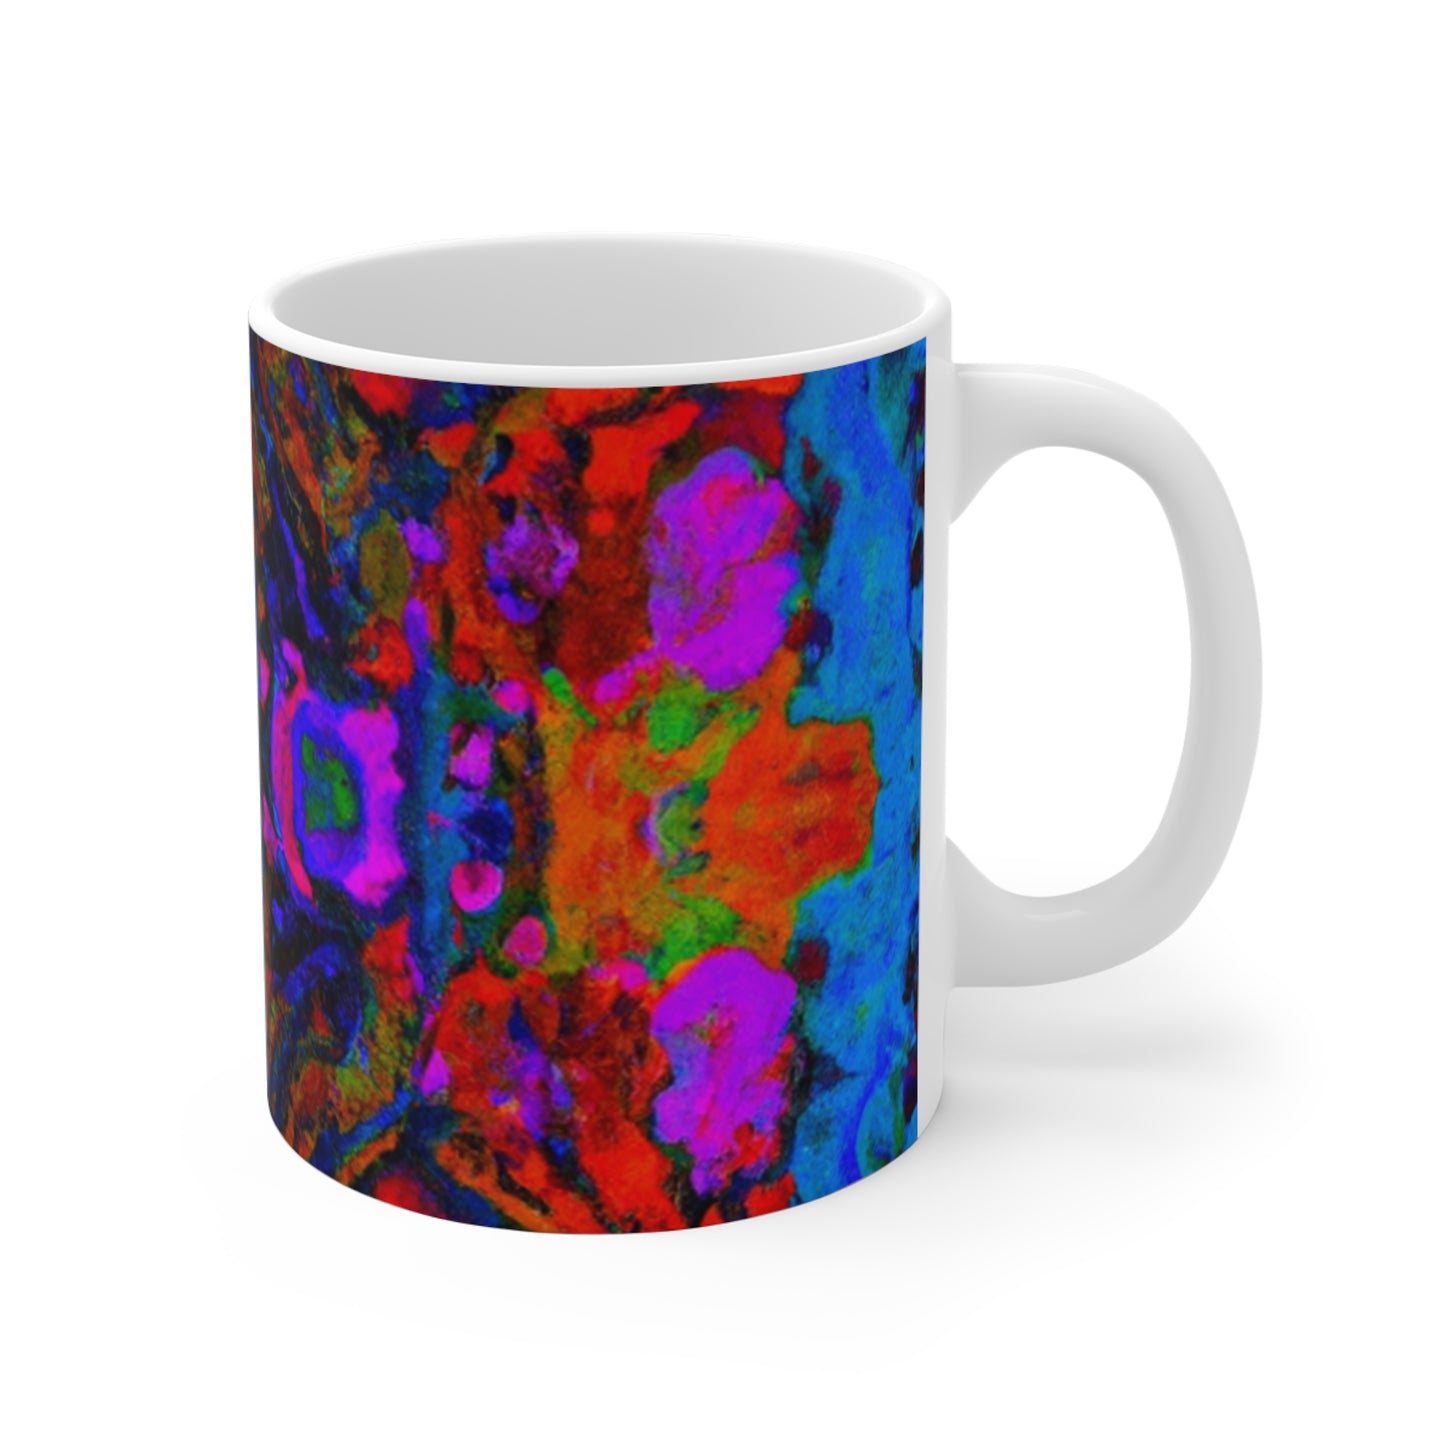 Mabel's Roast - Psychedelic Coffee Cup Mug 11 Ounce